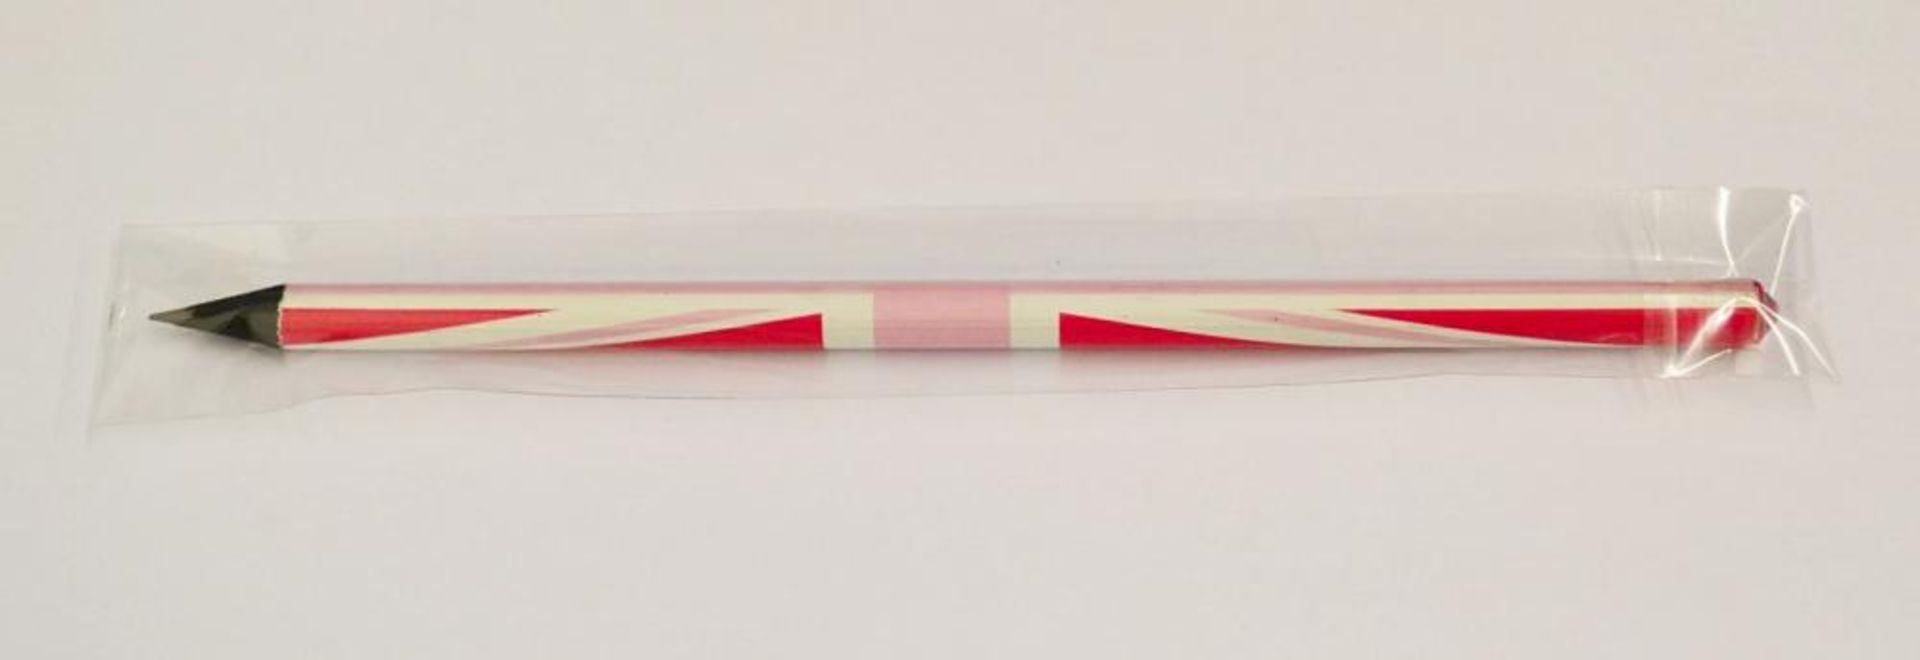 140 x ICE London "Union Jack" Pencils - Made With SWAROVSKI® ELEMENTS - Colour: PINK - New / Sealed - Image 2 of 3